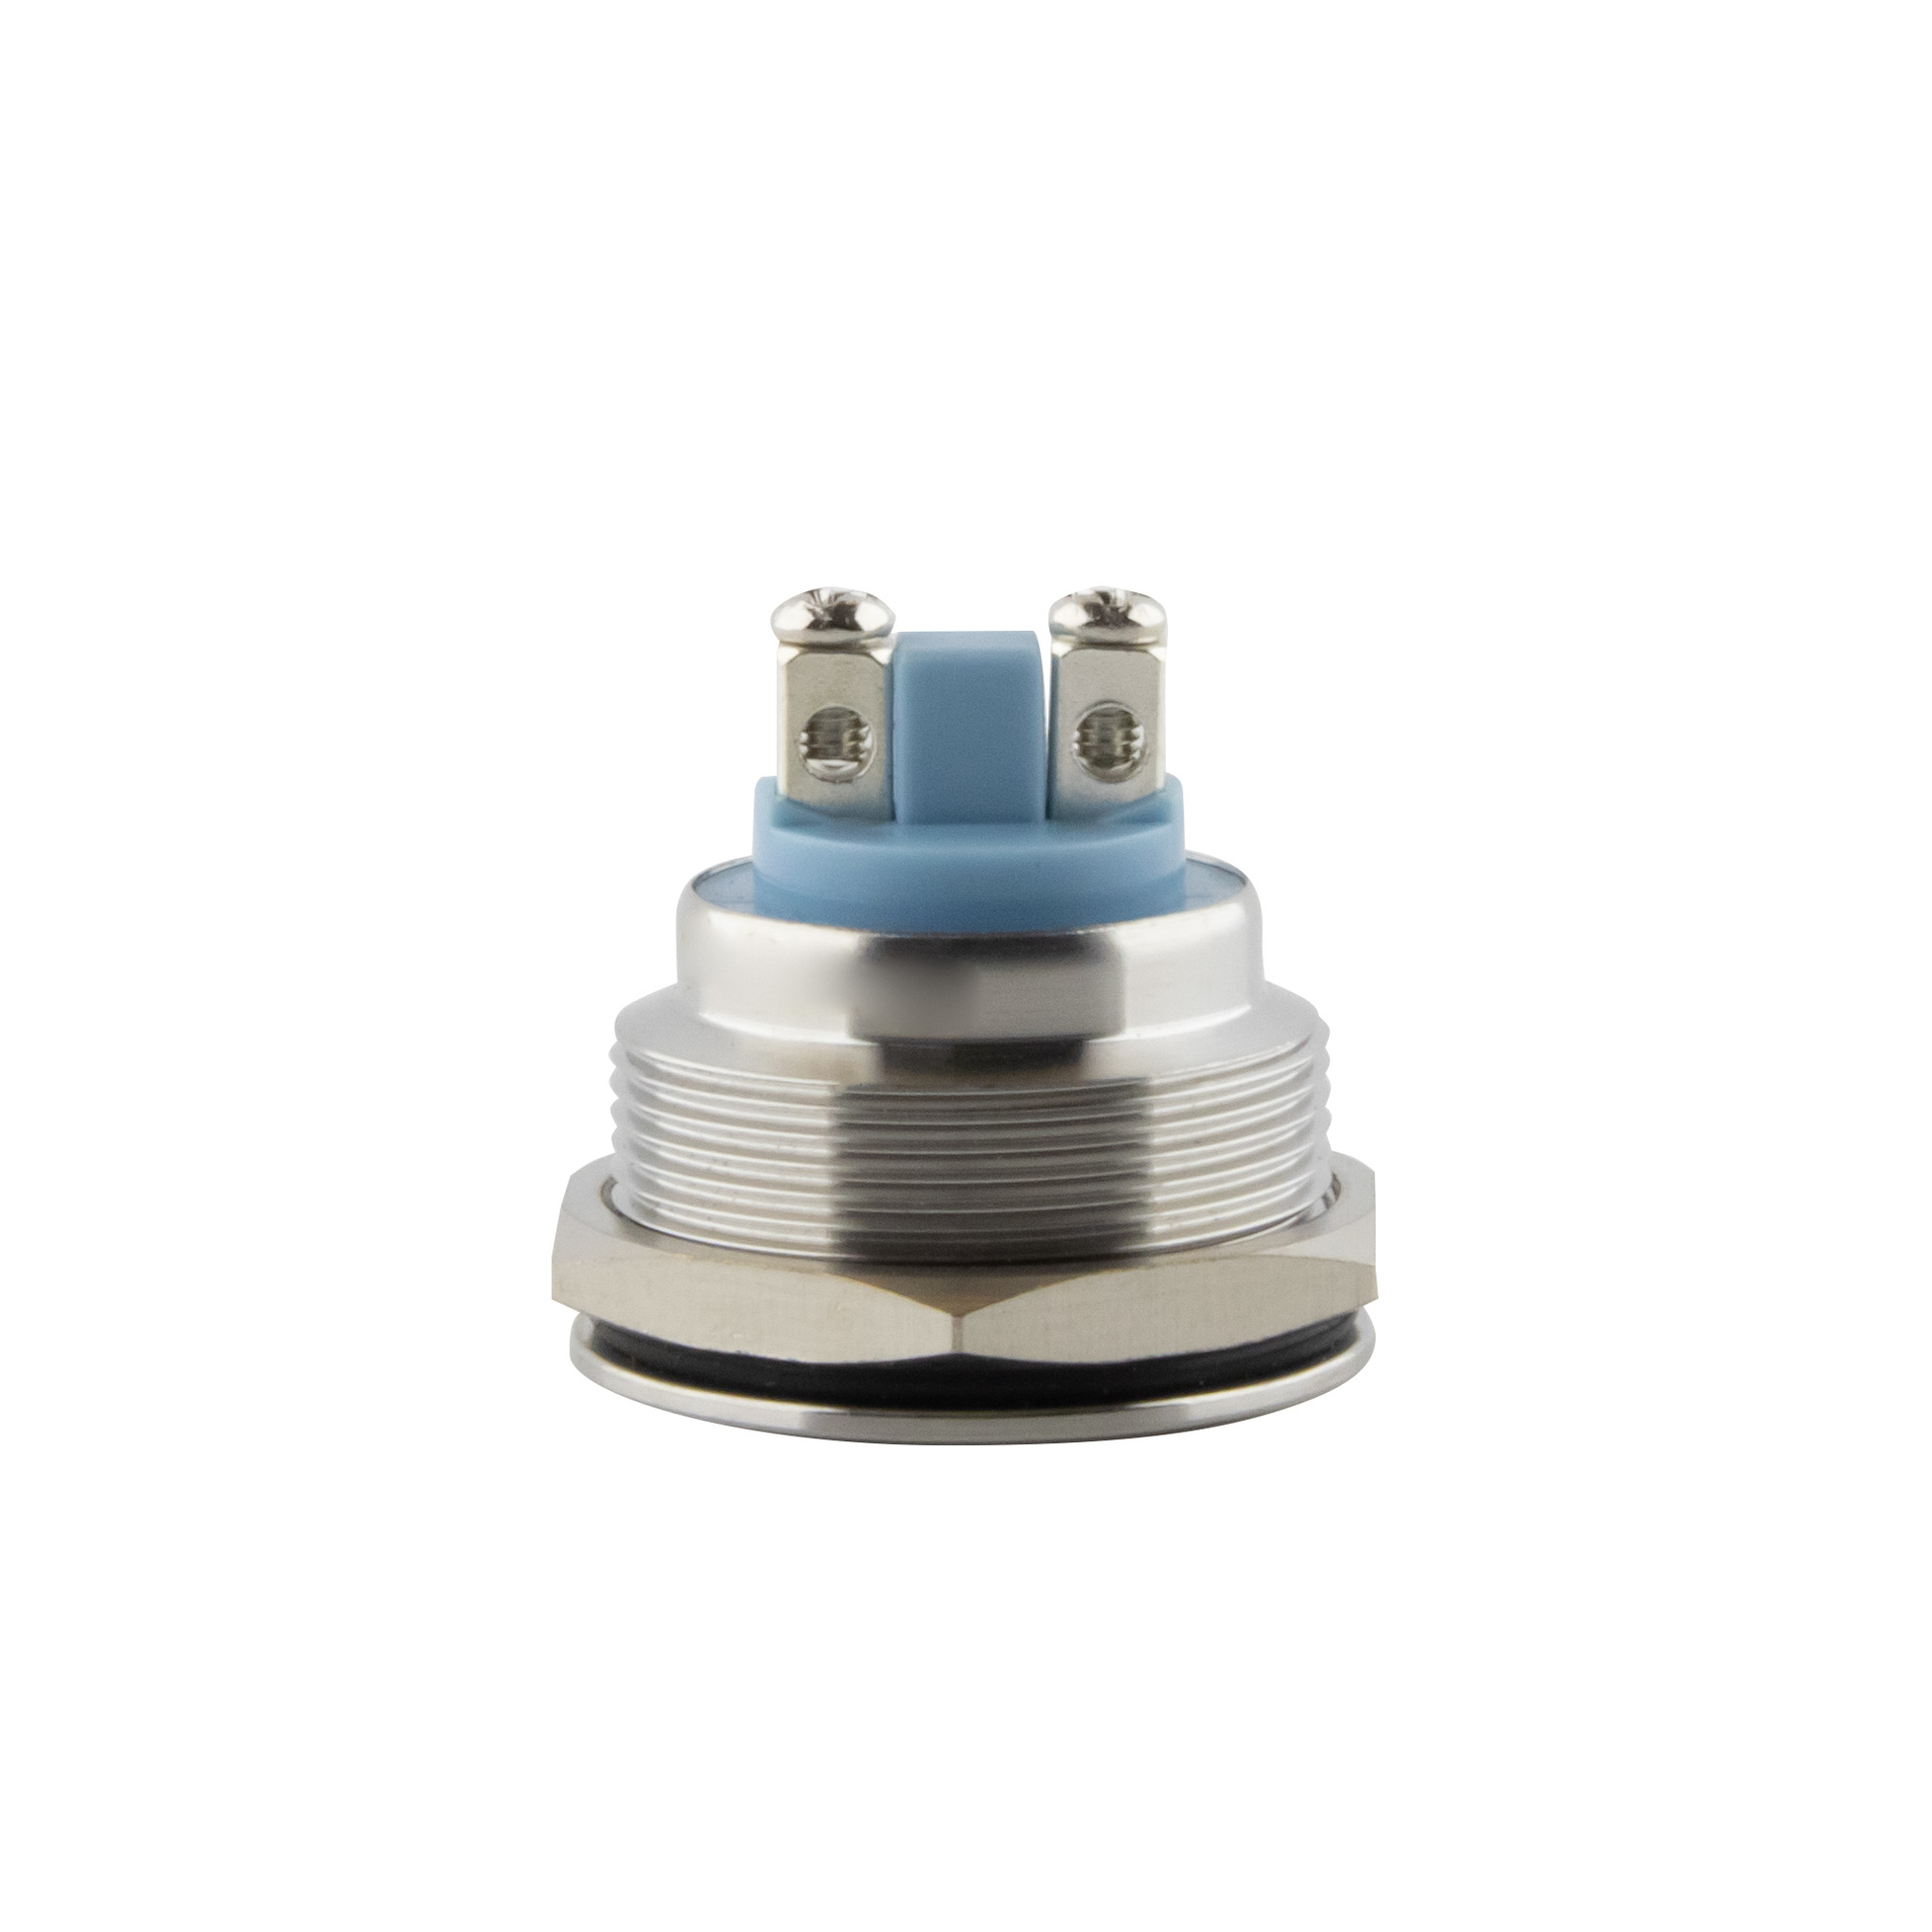 Push-button momentary Ø16mm domed -screw